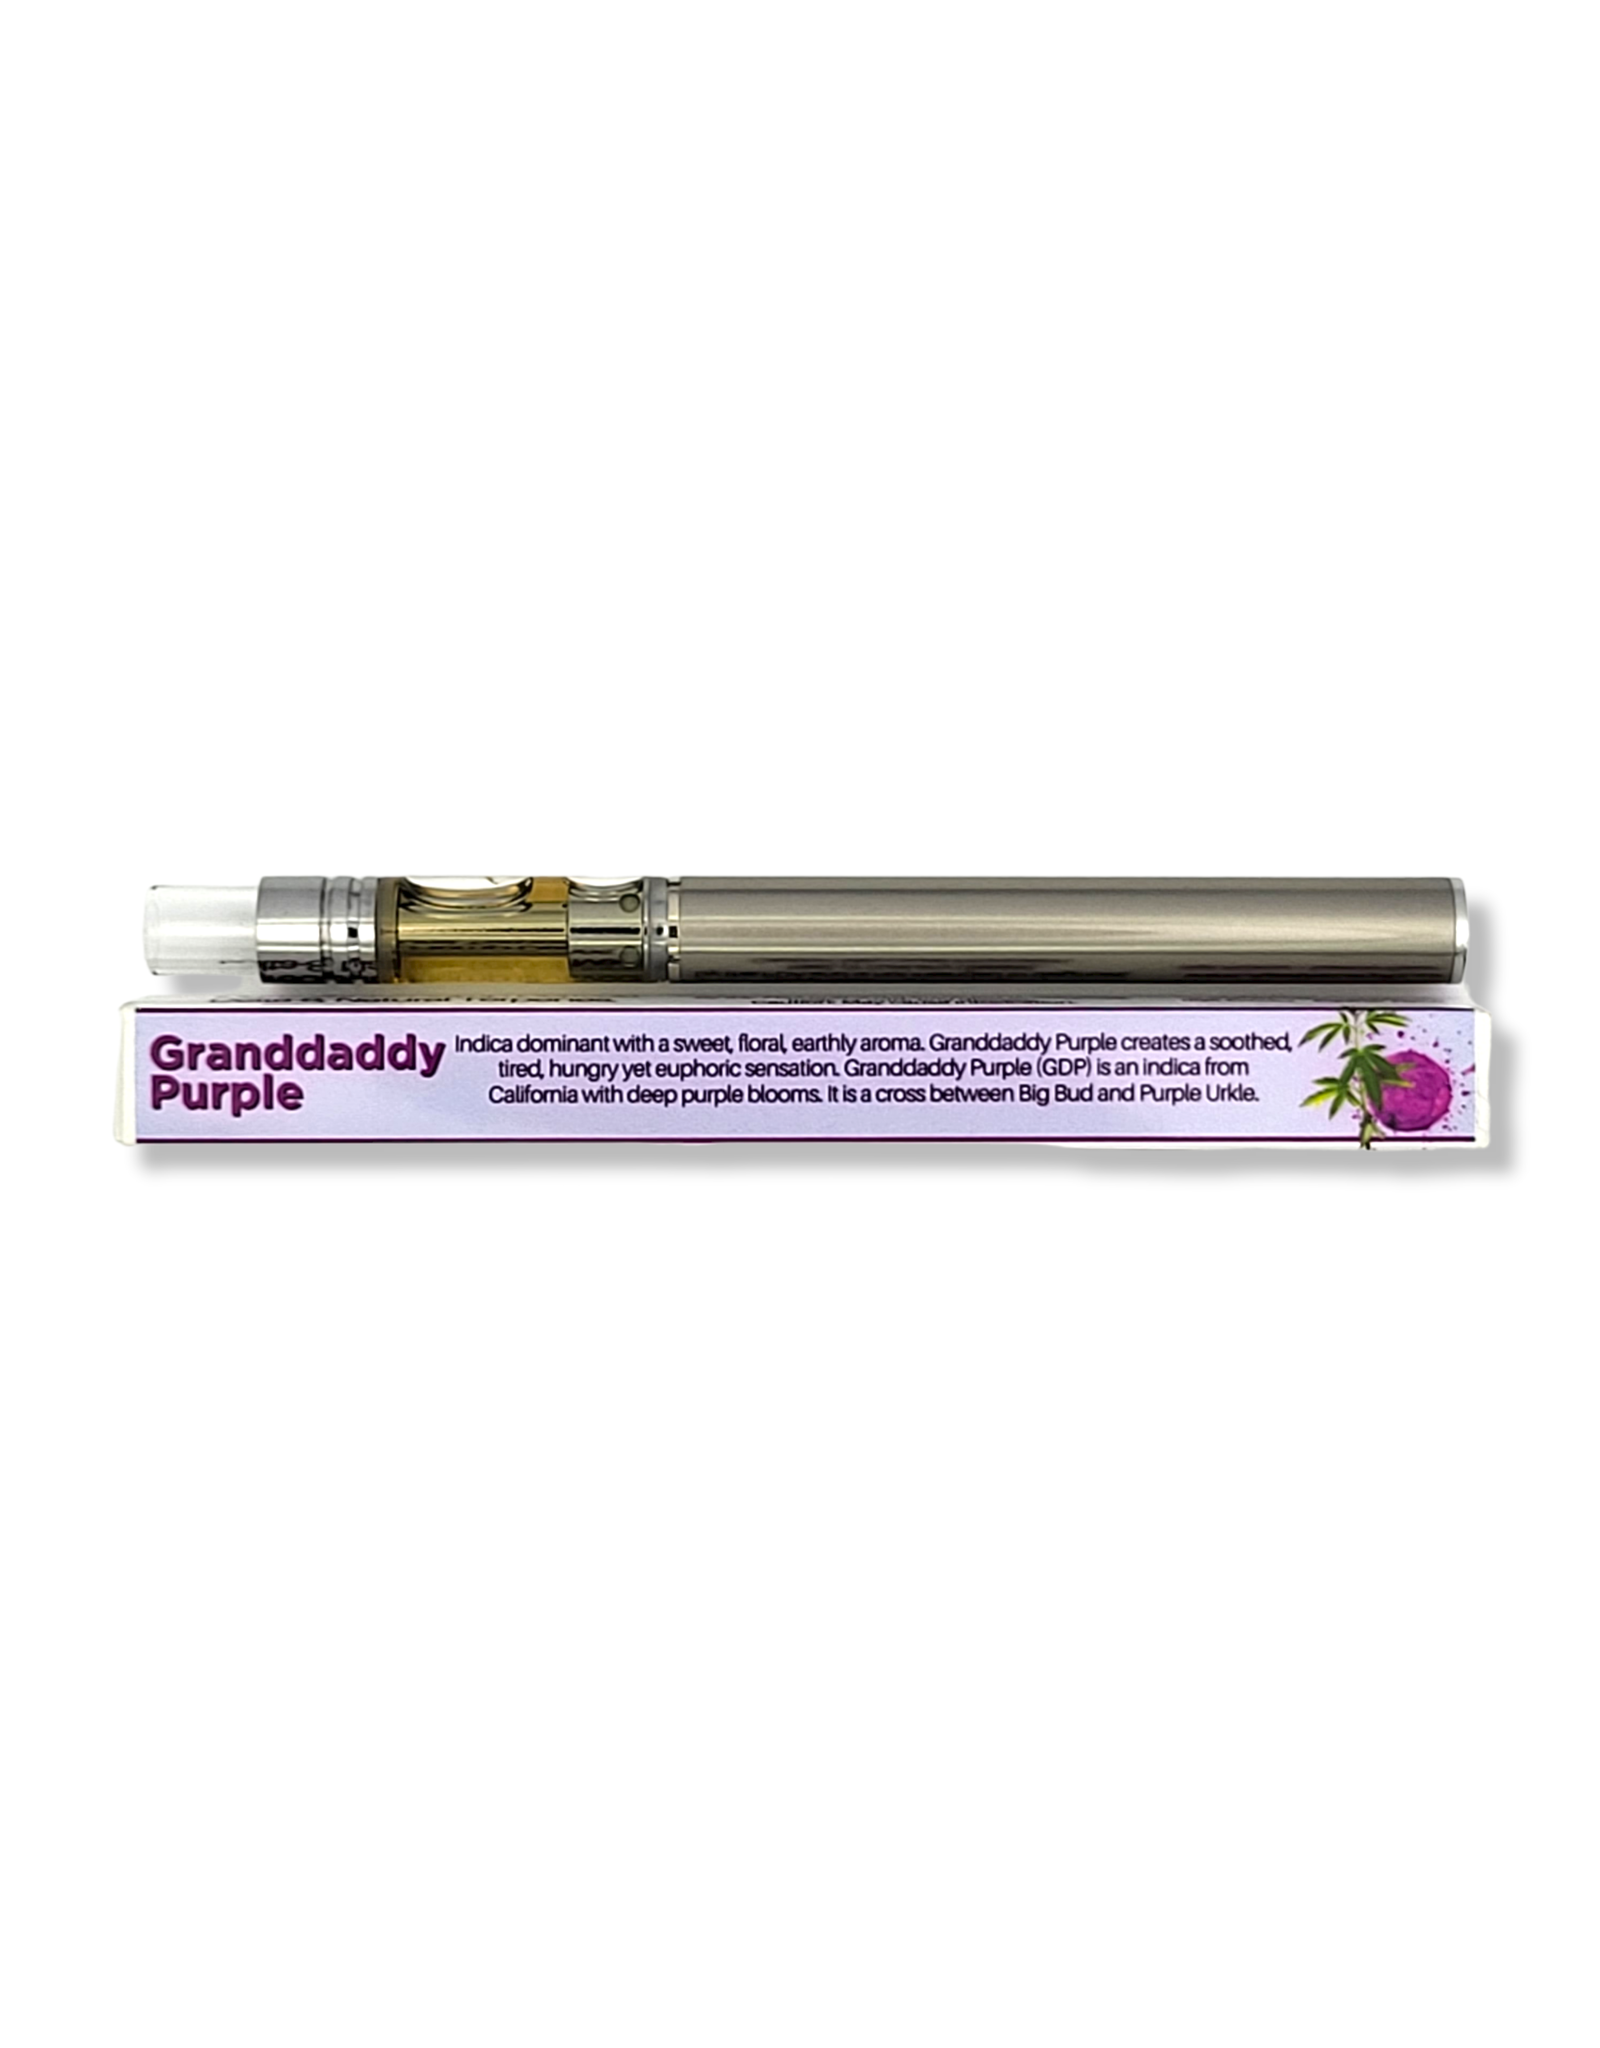 Apothecary Rx Apothecary Rx Delta 8 Granddaddy Purple  Disposable Cartridge 1gr